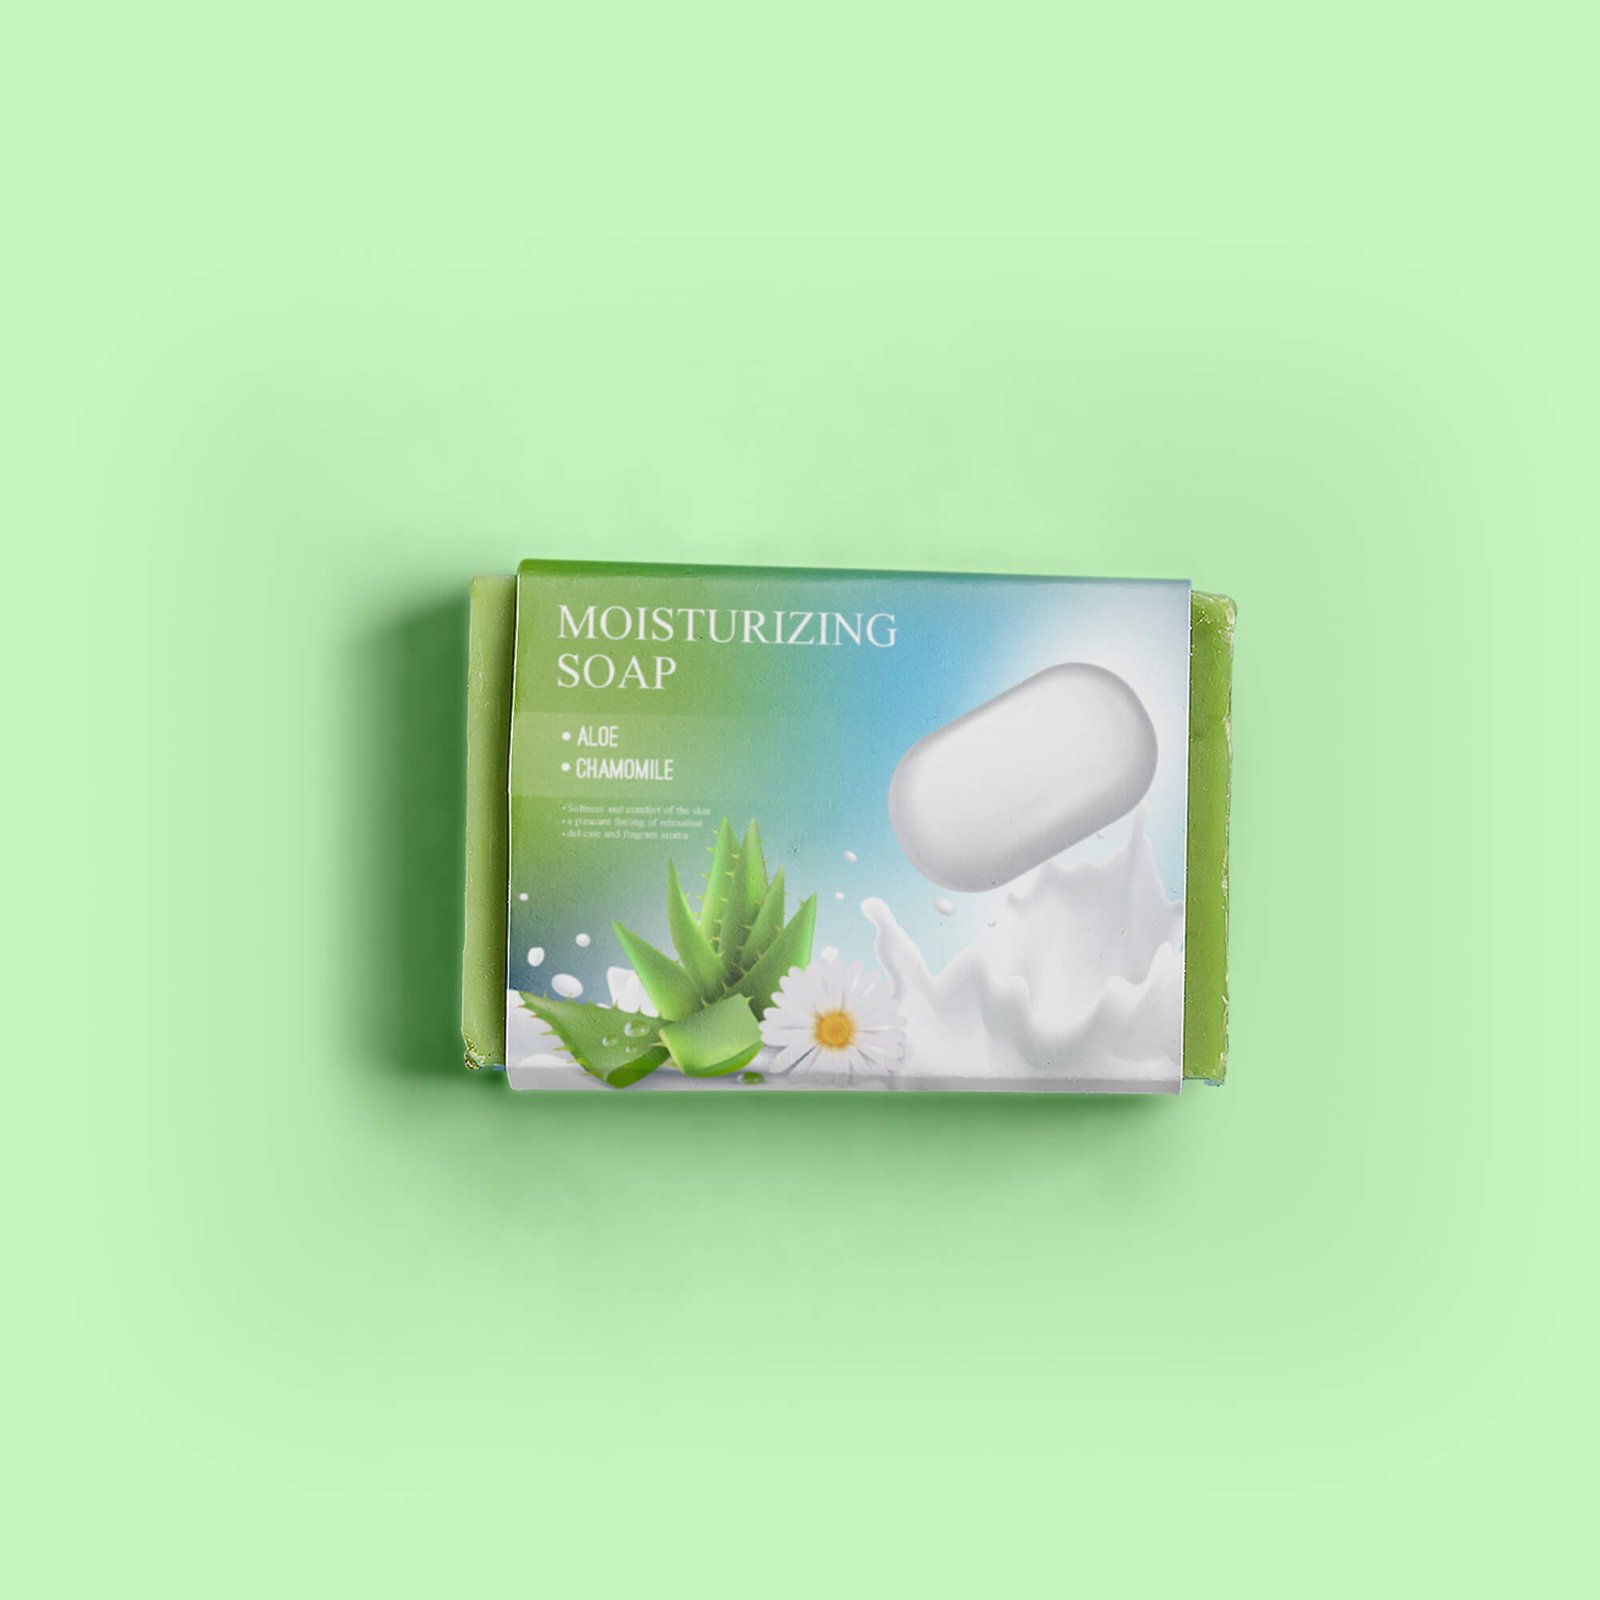 Design Free Soap Packaging Mockup PSD Template